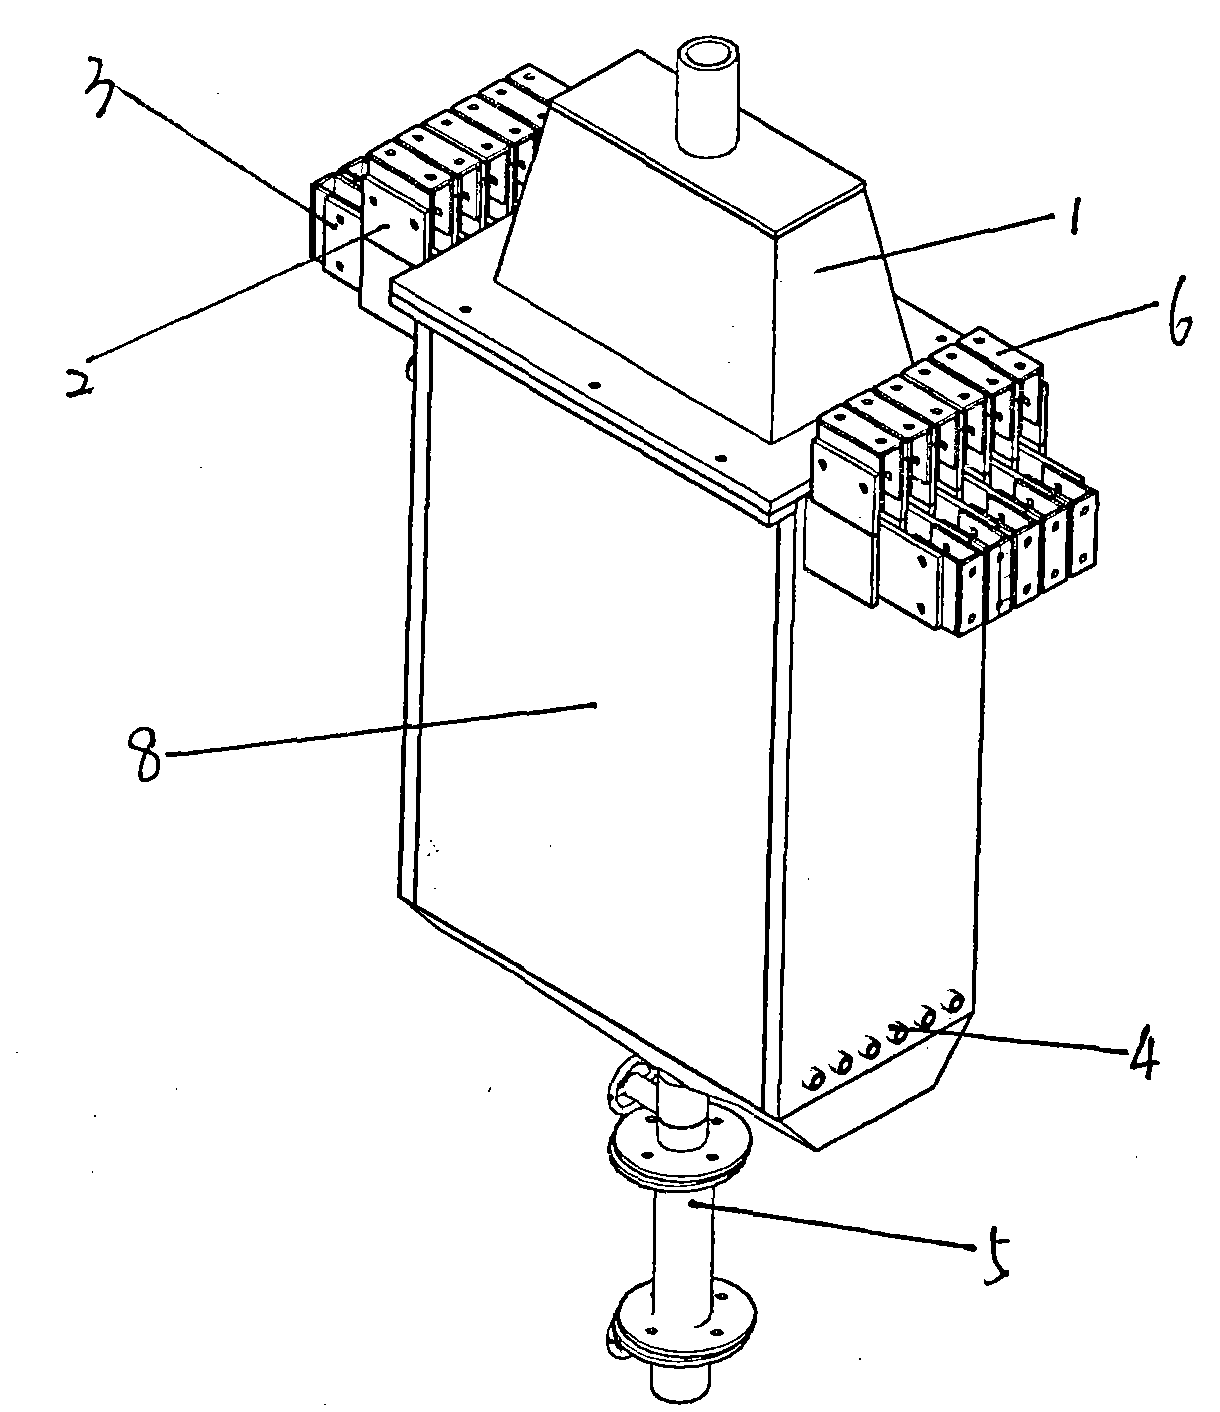 Electrobath capable of being used for continuous electrolysis to synthesize butanedioic acid